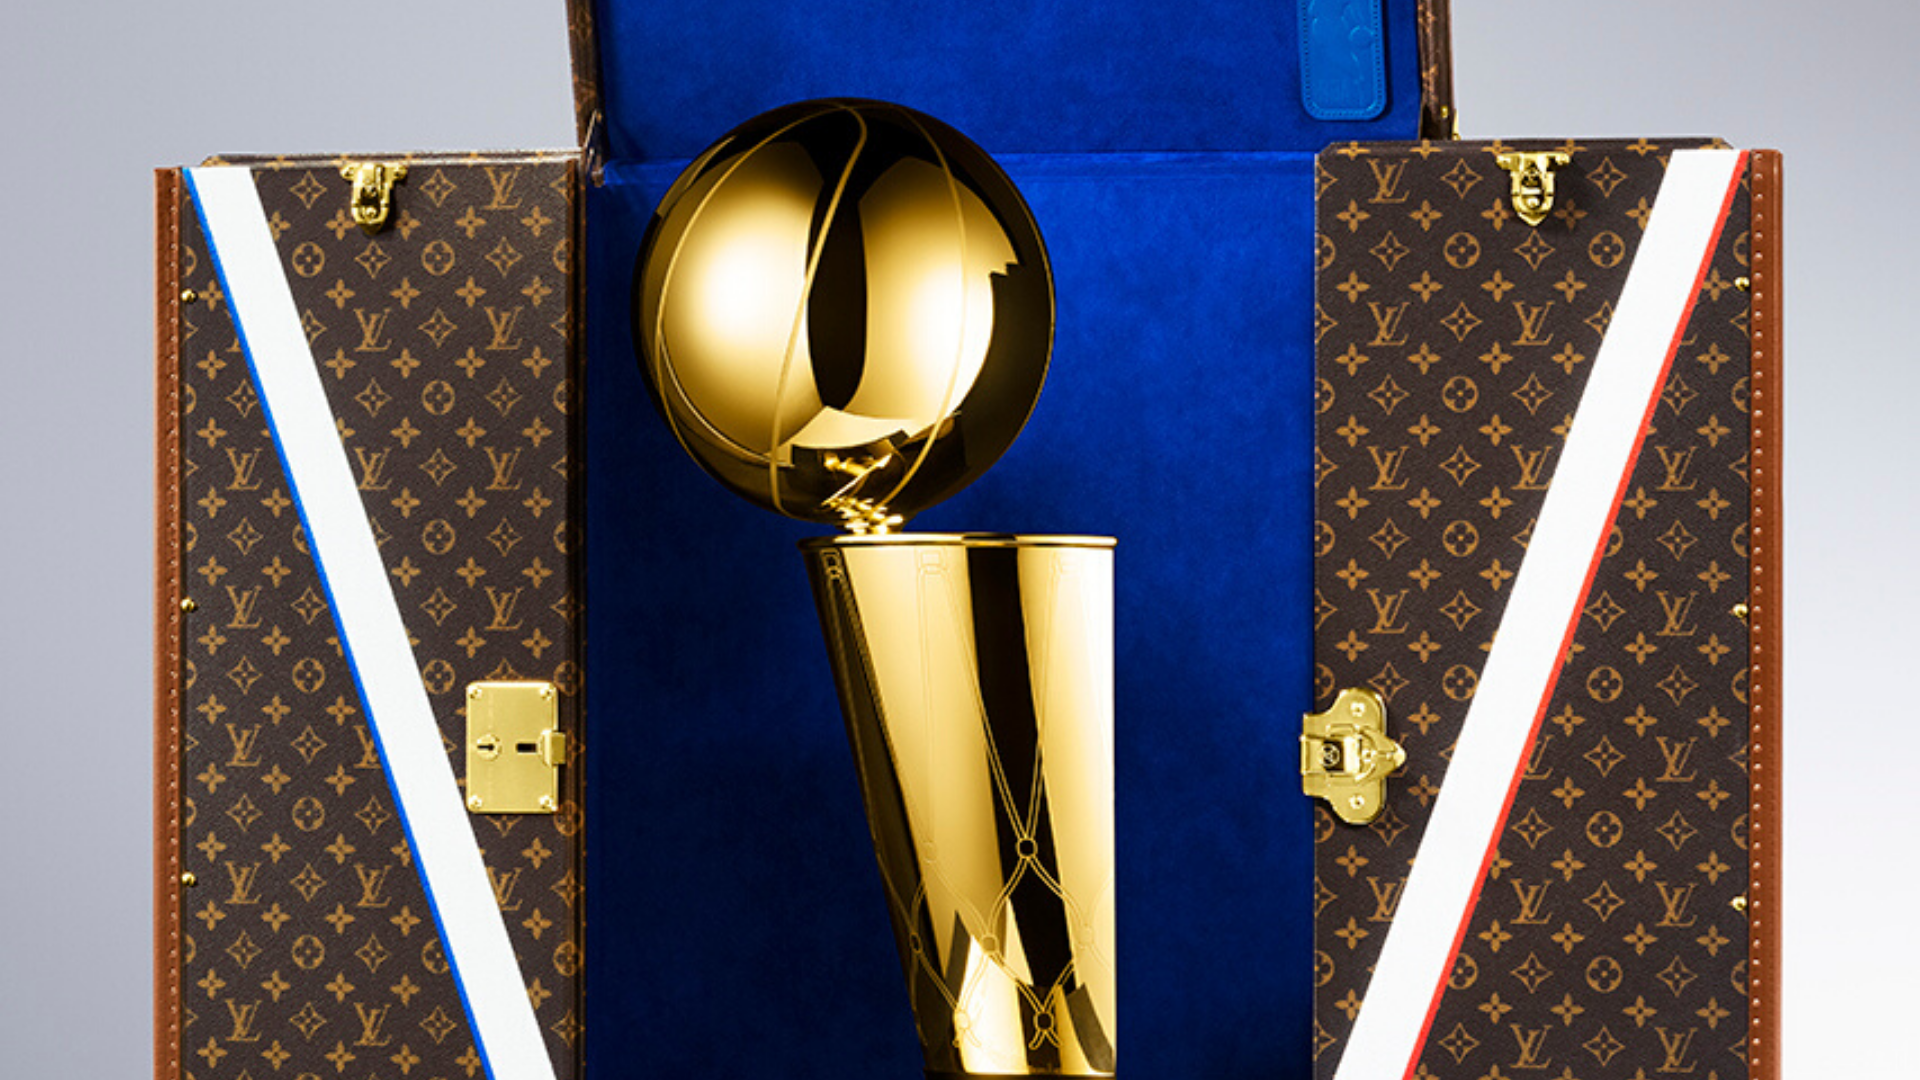 Louis Vuitton on X: Victory travels in #LouisVuitton. The Maison